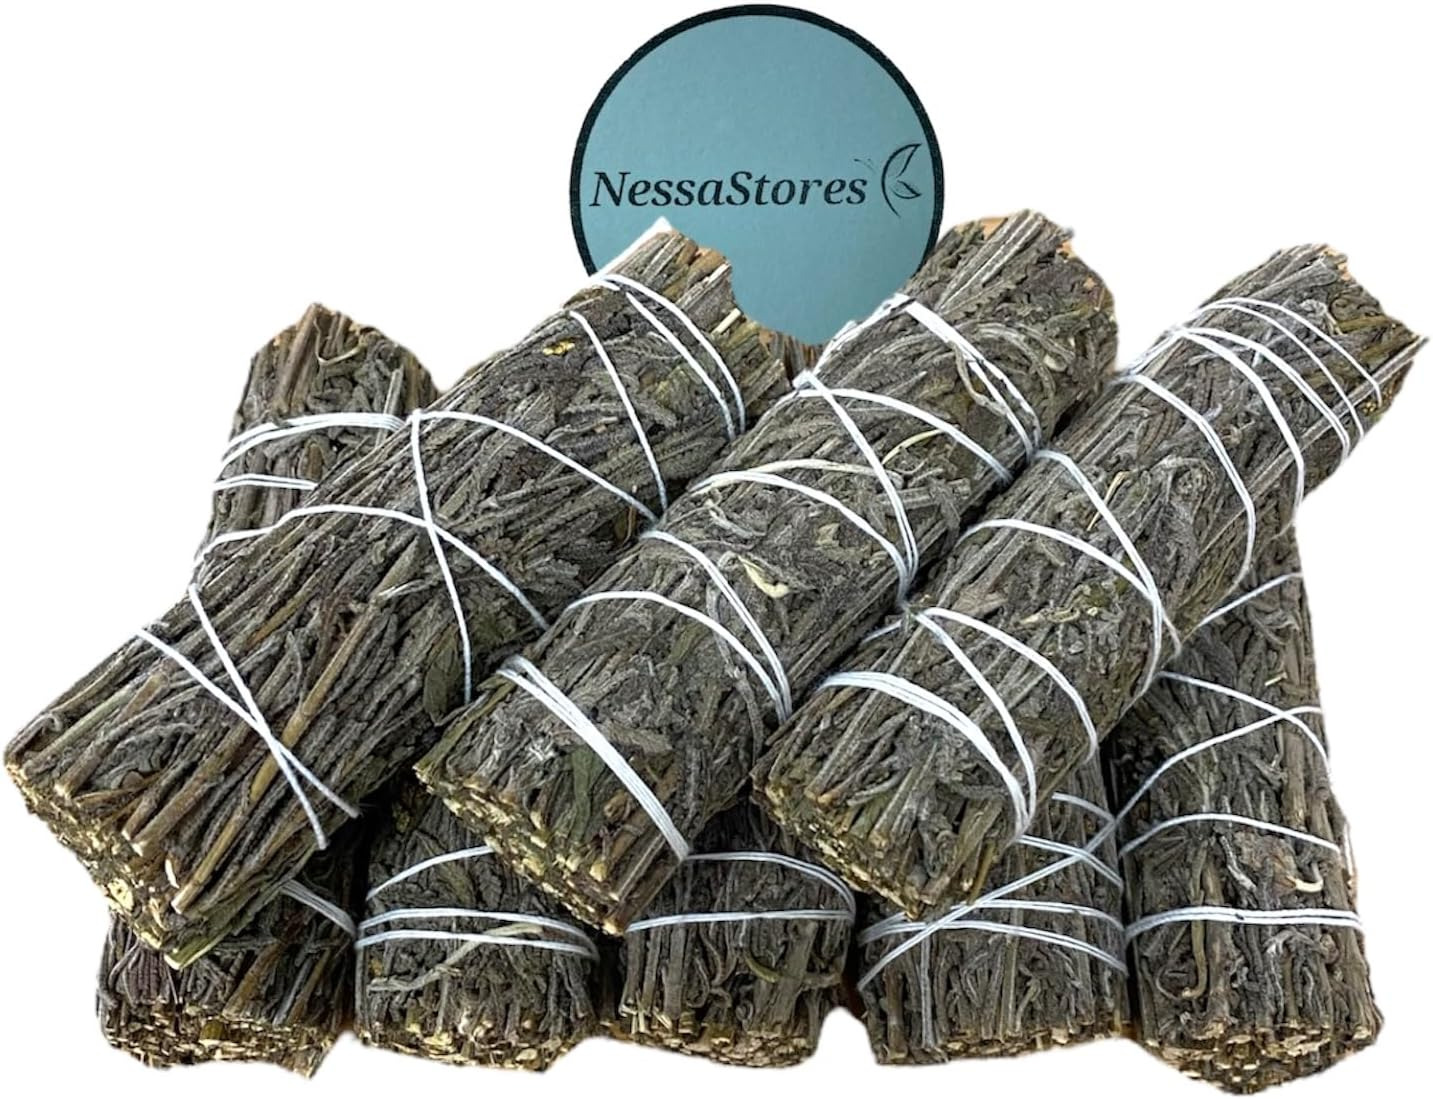 16 Dried Lavender Smudge Sticks, 4 Inch Hand Tied, All Natural, Ethically Source